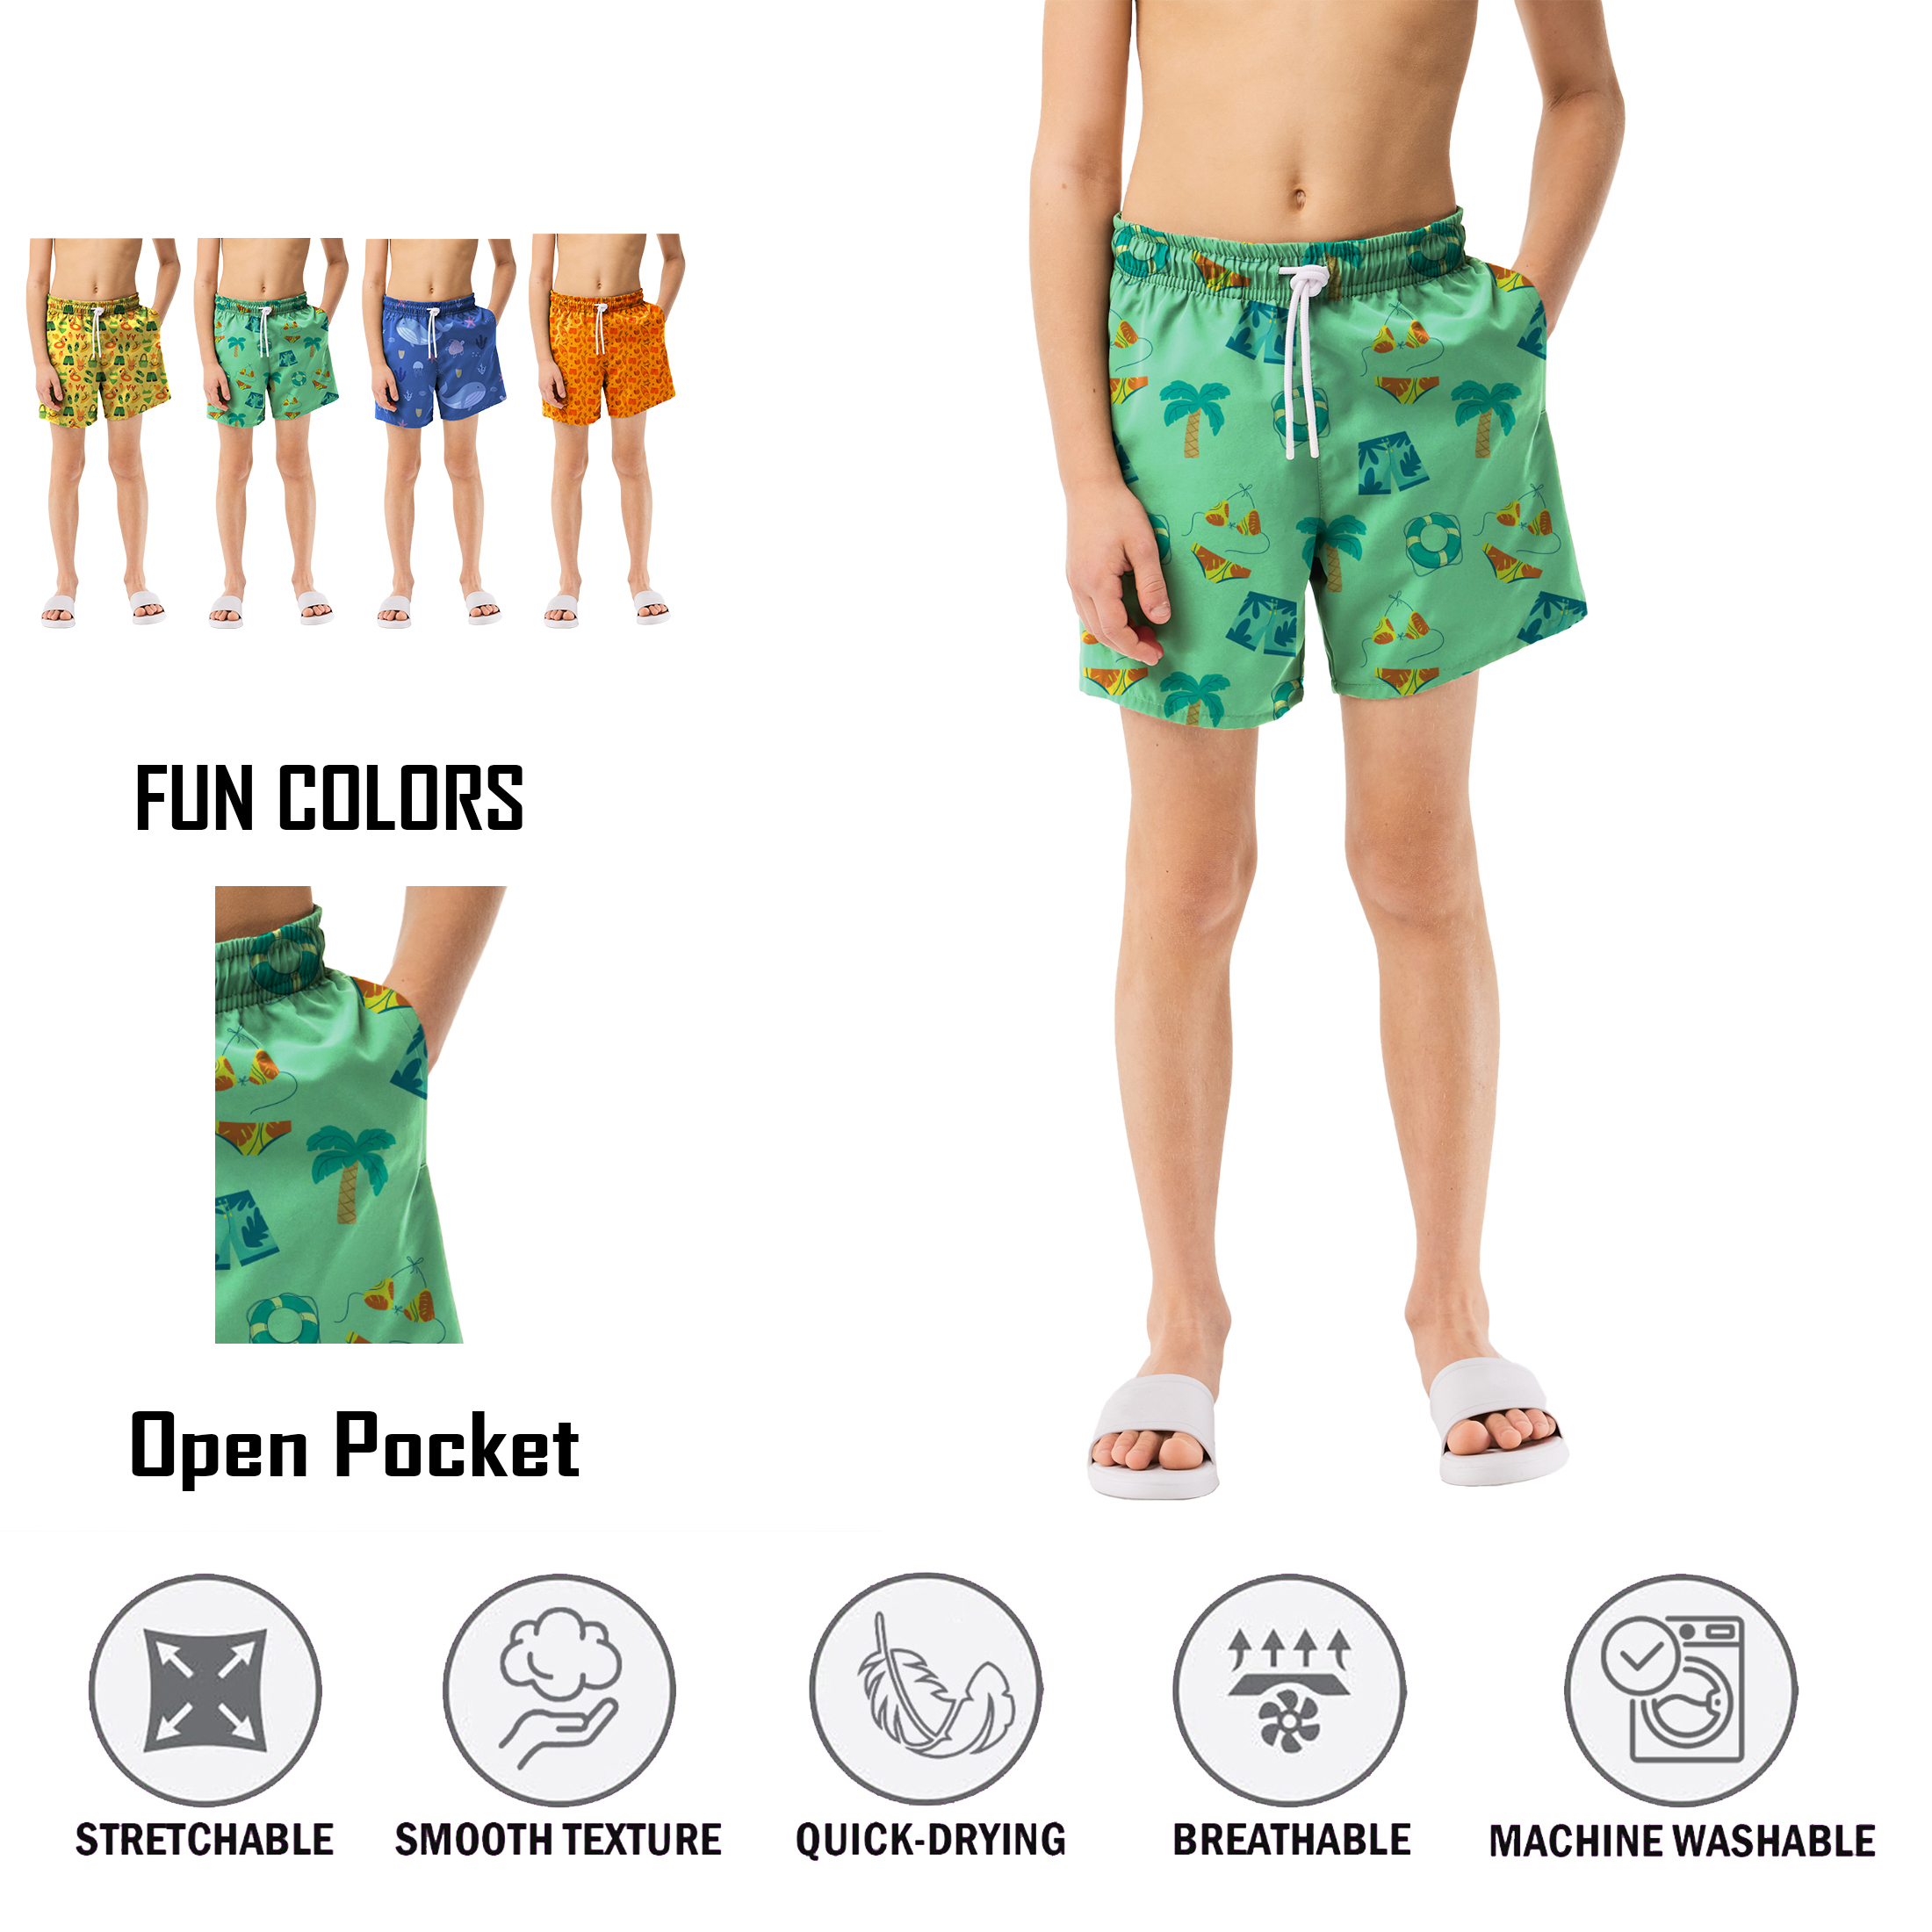 3-Pack: Boy's Quick-Dry Solid & Print Active Summer Beach Swimming Trunks Shorts - Print, Large